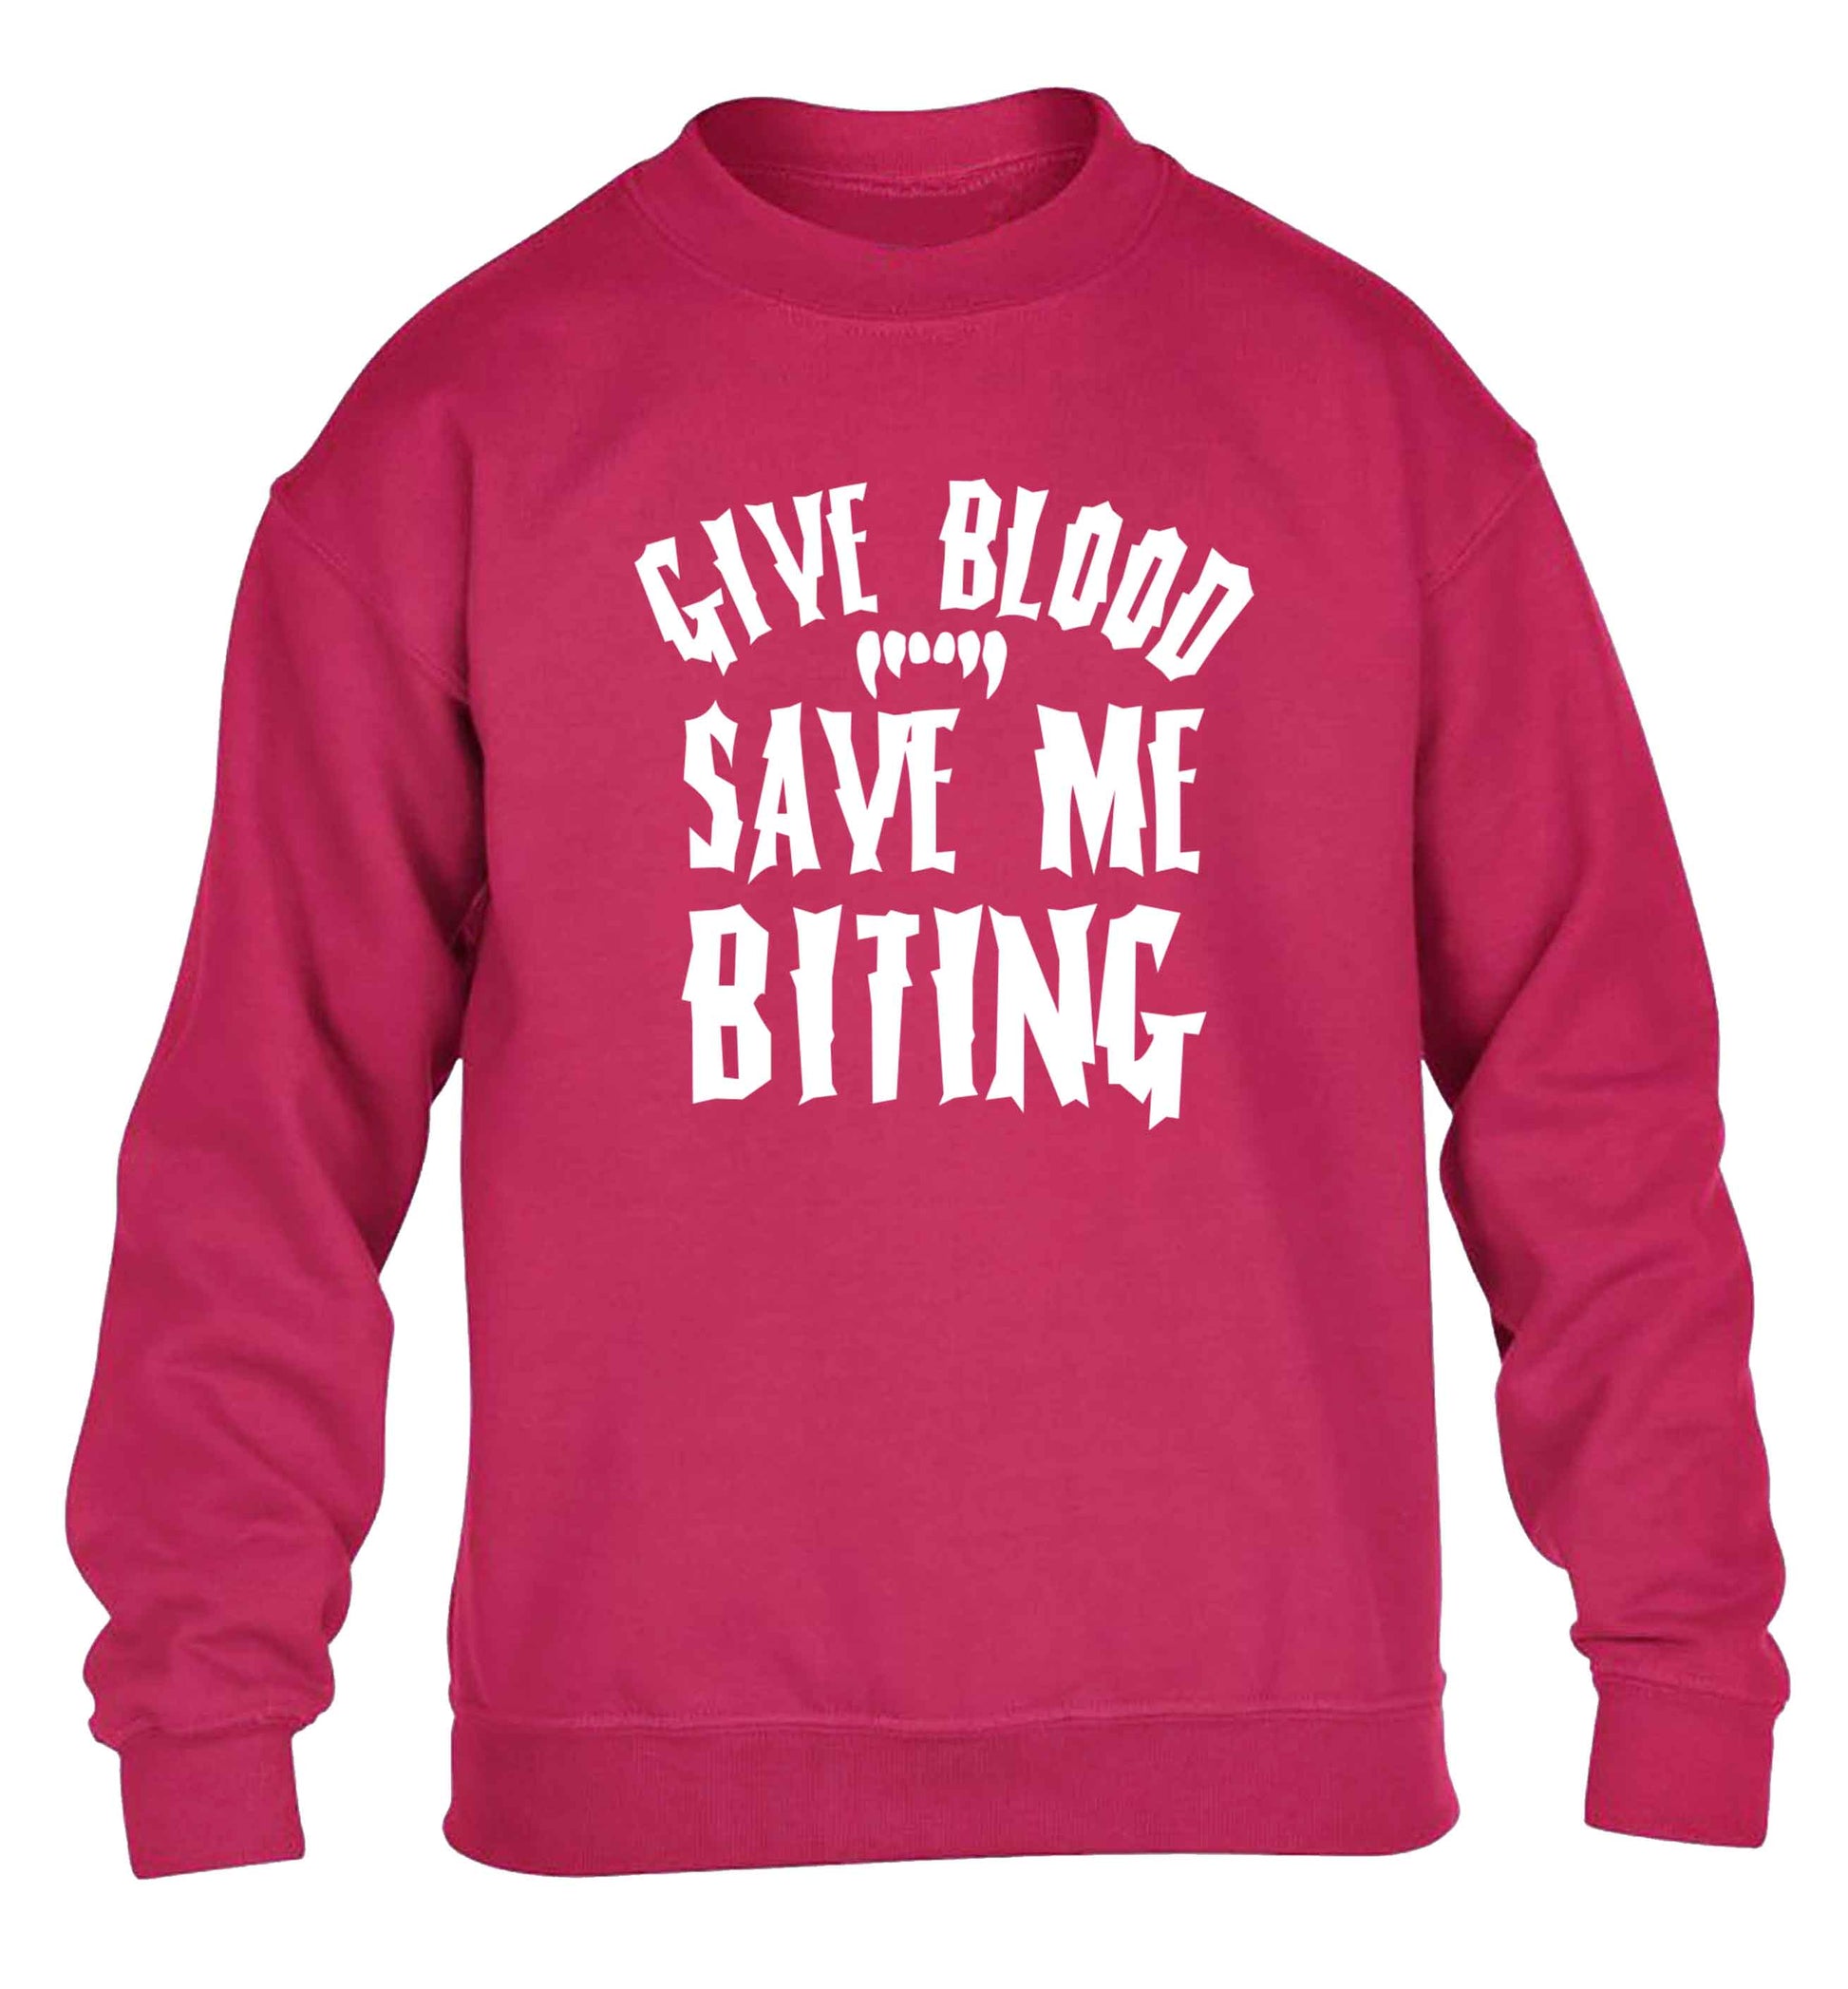 Give blood save me biting children's pink sweater 12-13 Years